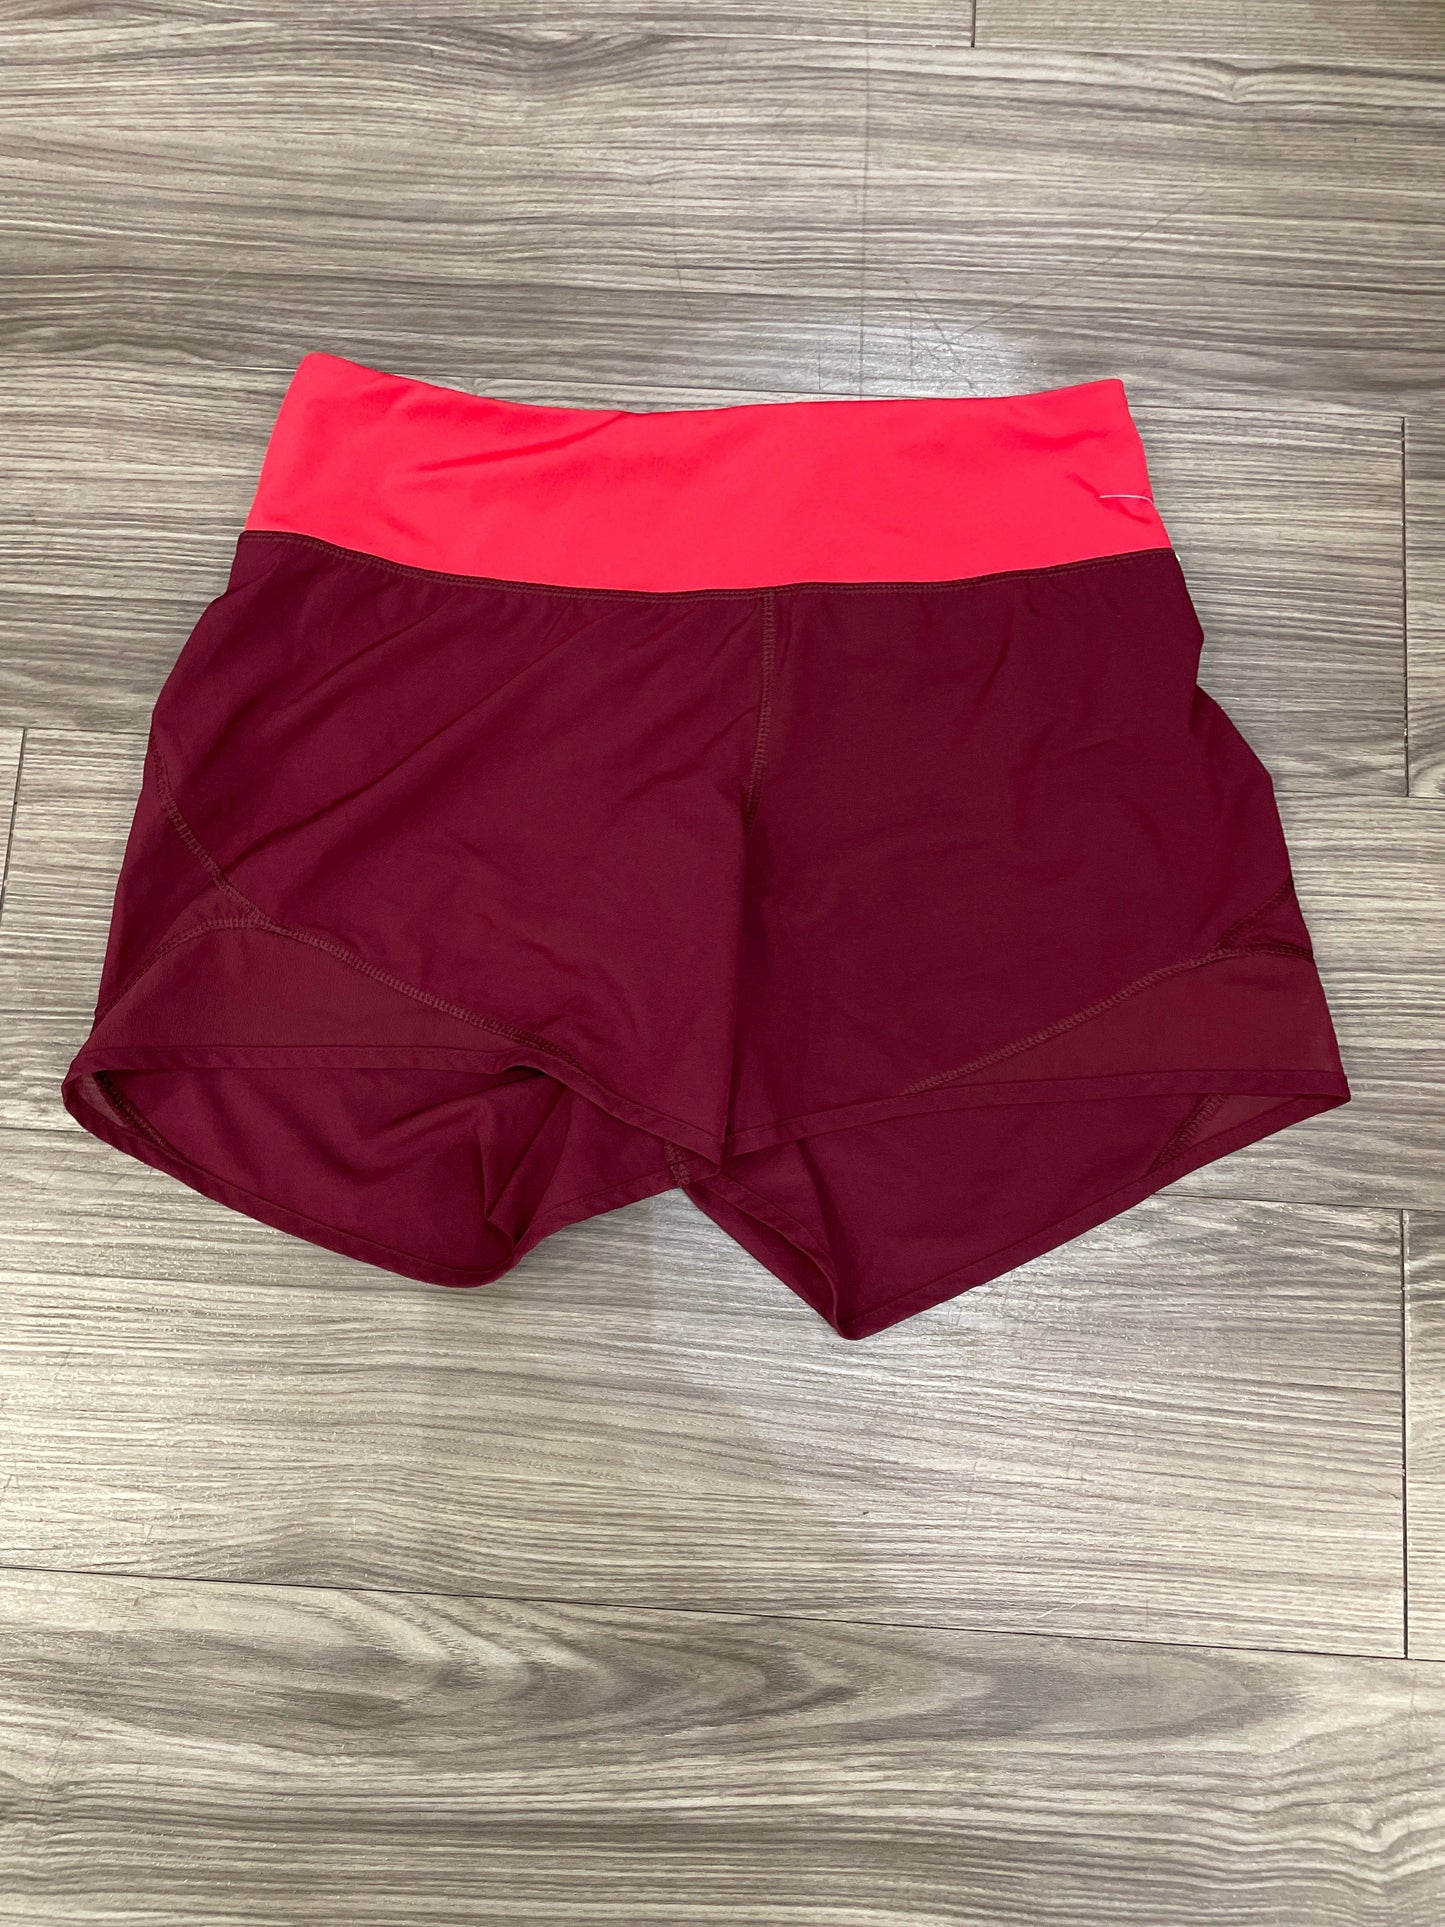 Red Athletic Shorts Old Navy, Size M